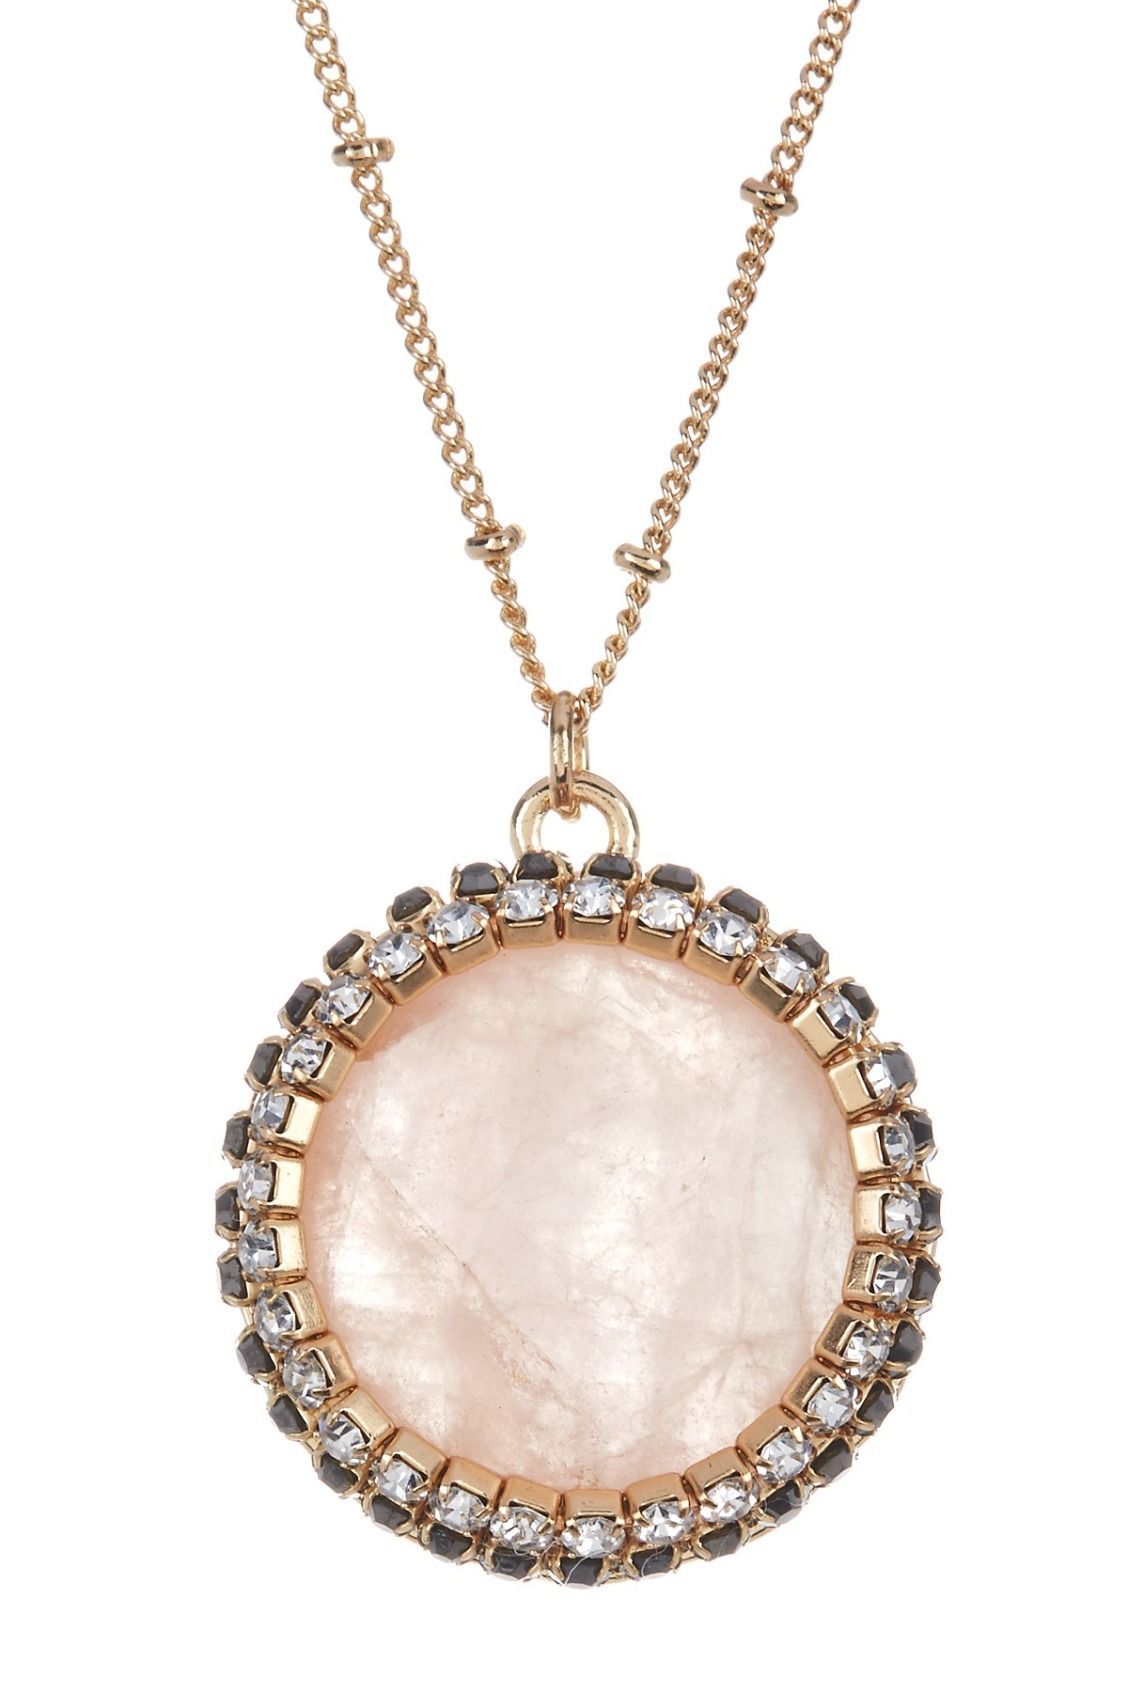 Sparkling Sage Crystal Framed Circle Stone Pendant Necklace | Gems In Current Sparkling Stones Pendant Necklaces (View 1 of 25)